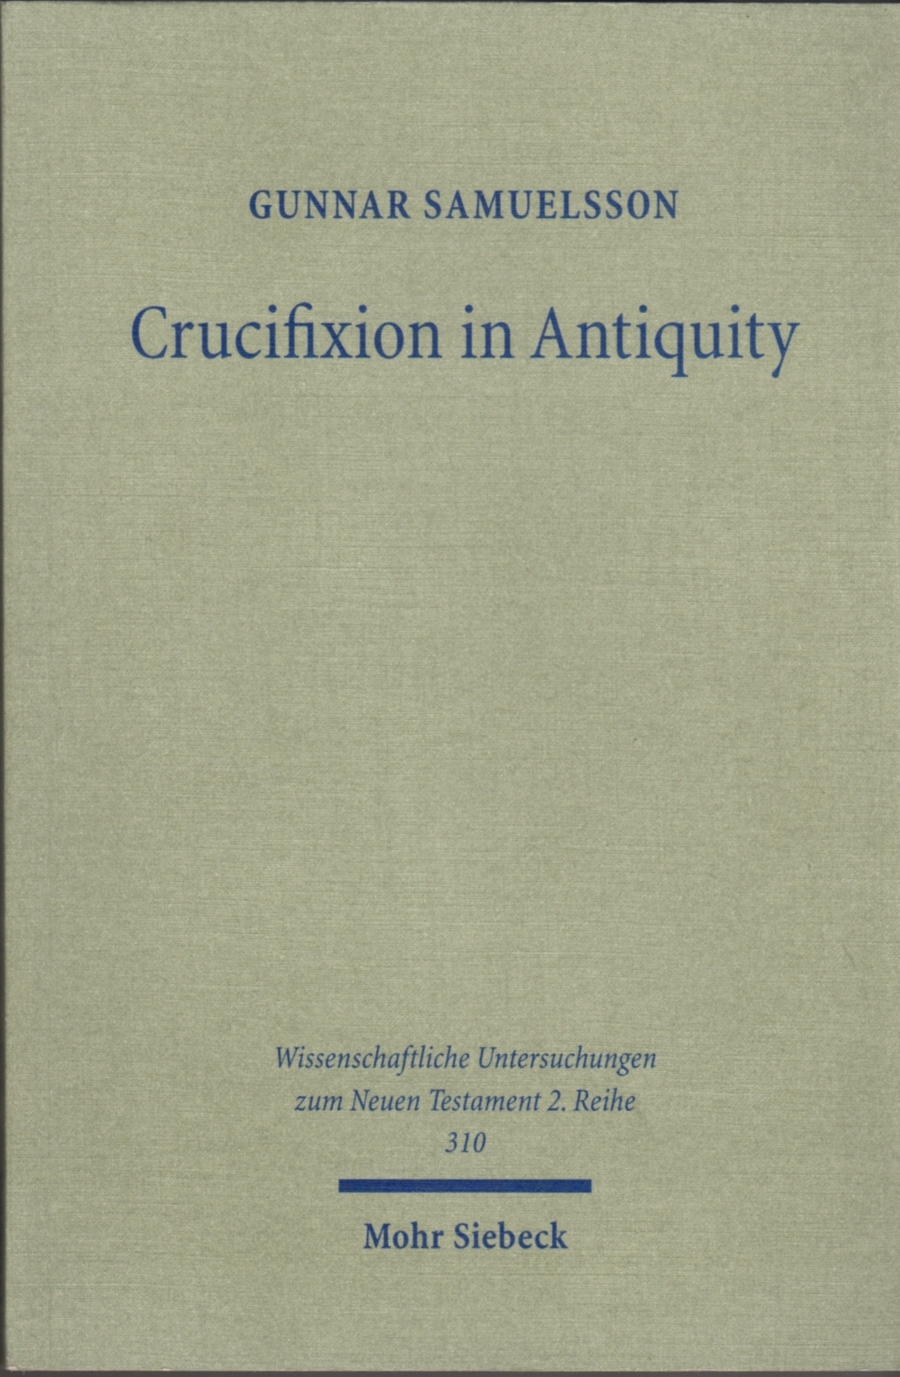 Crucifixion in Antiquity: An Inquiry Into the Background and Significance of the New Testament Terminology of Crucifixion - Samuelsson, Gunnar